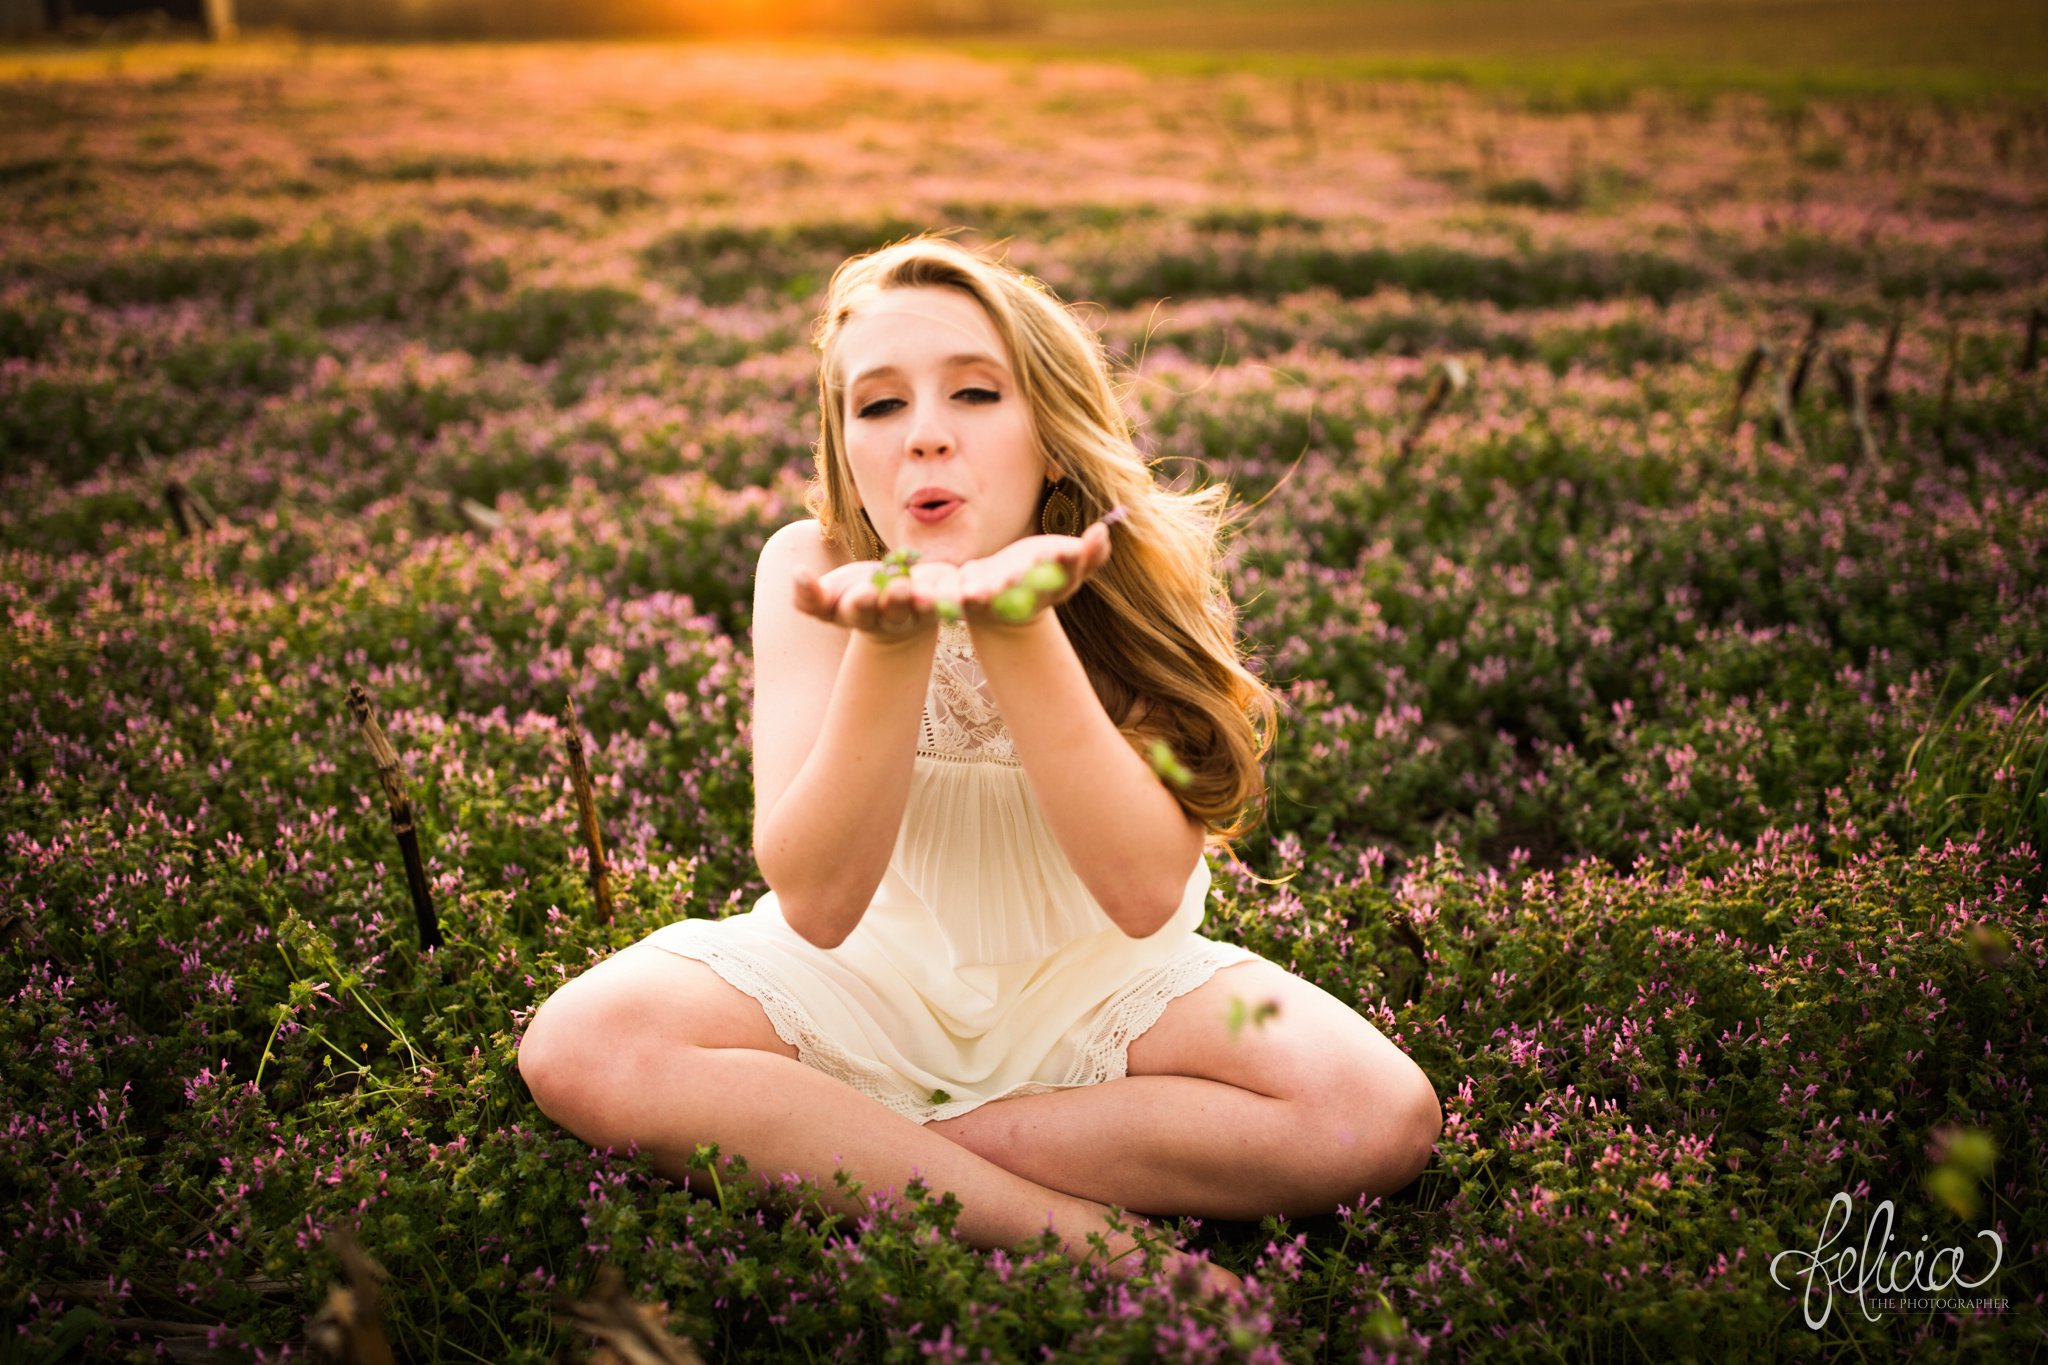 senior pictures | images by feliciathephotographer.com | Kansas City | rustic | long blonde hair | nature background | white dress | elegant | dramatic | candid | dramatic pose | flower field | sitting in flowers | cross legged | purple flowers | blowing kisses 